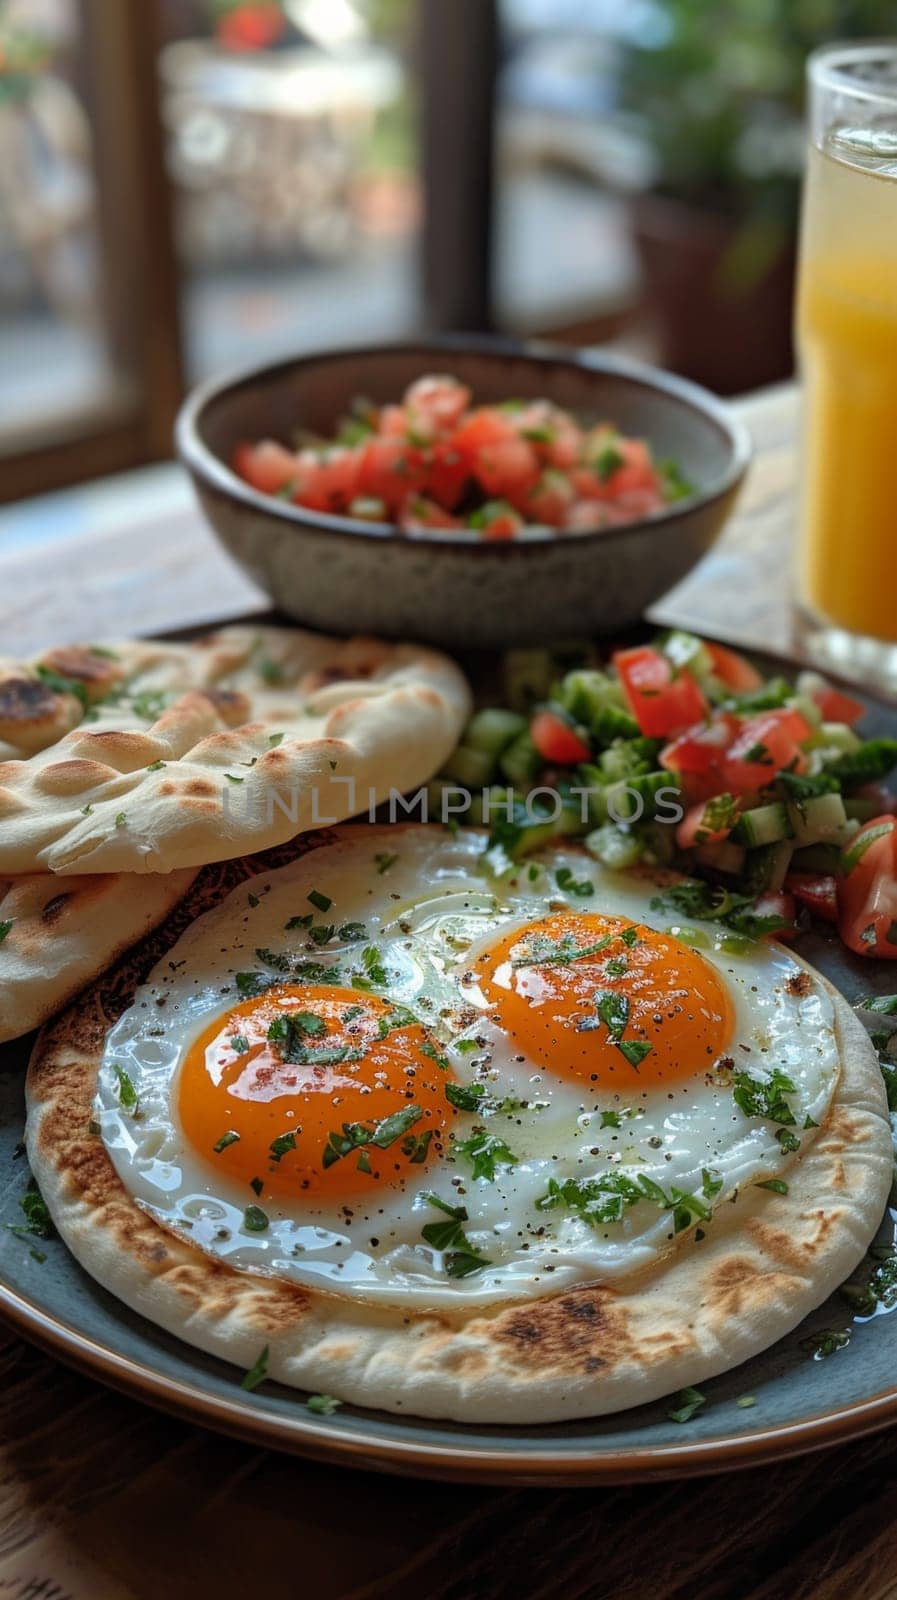 Typical Israeli breakfast with two eggs on a plate and a salad next to it in the bowl.